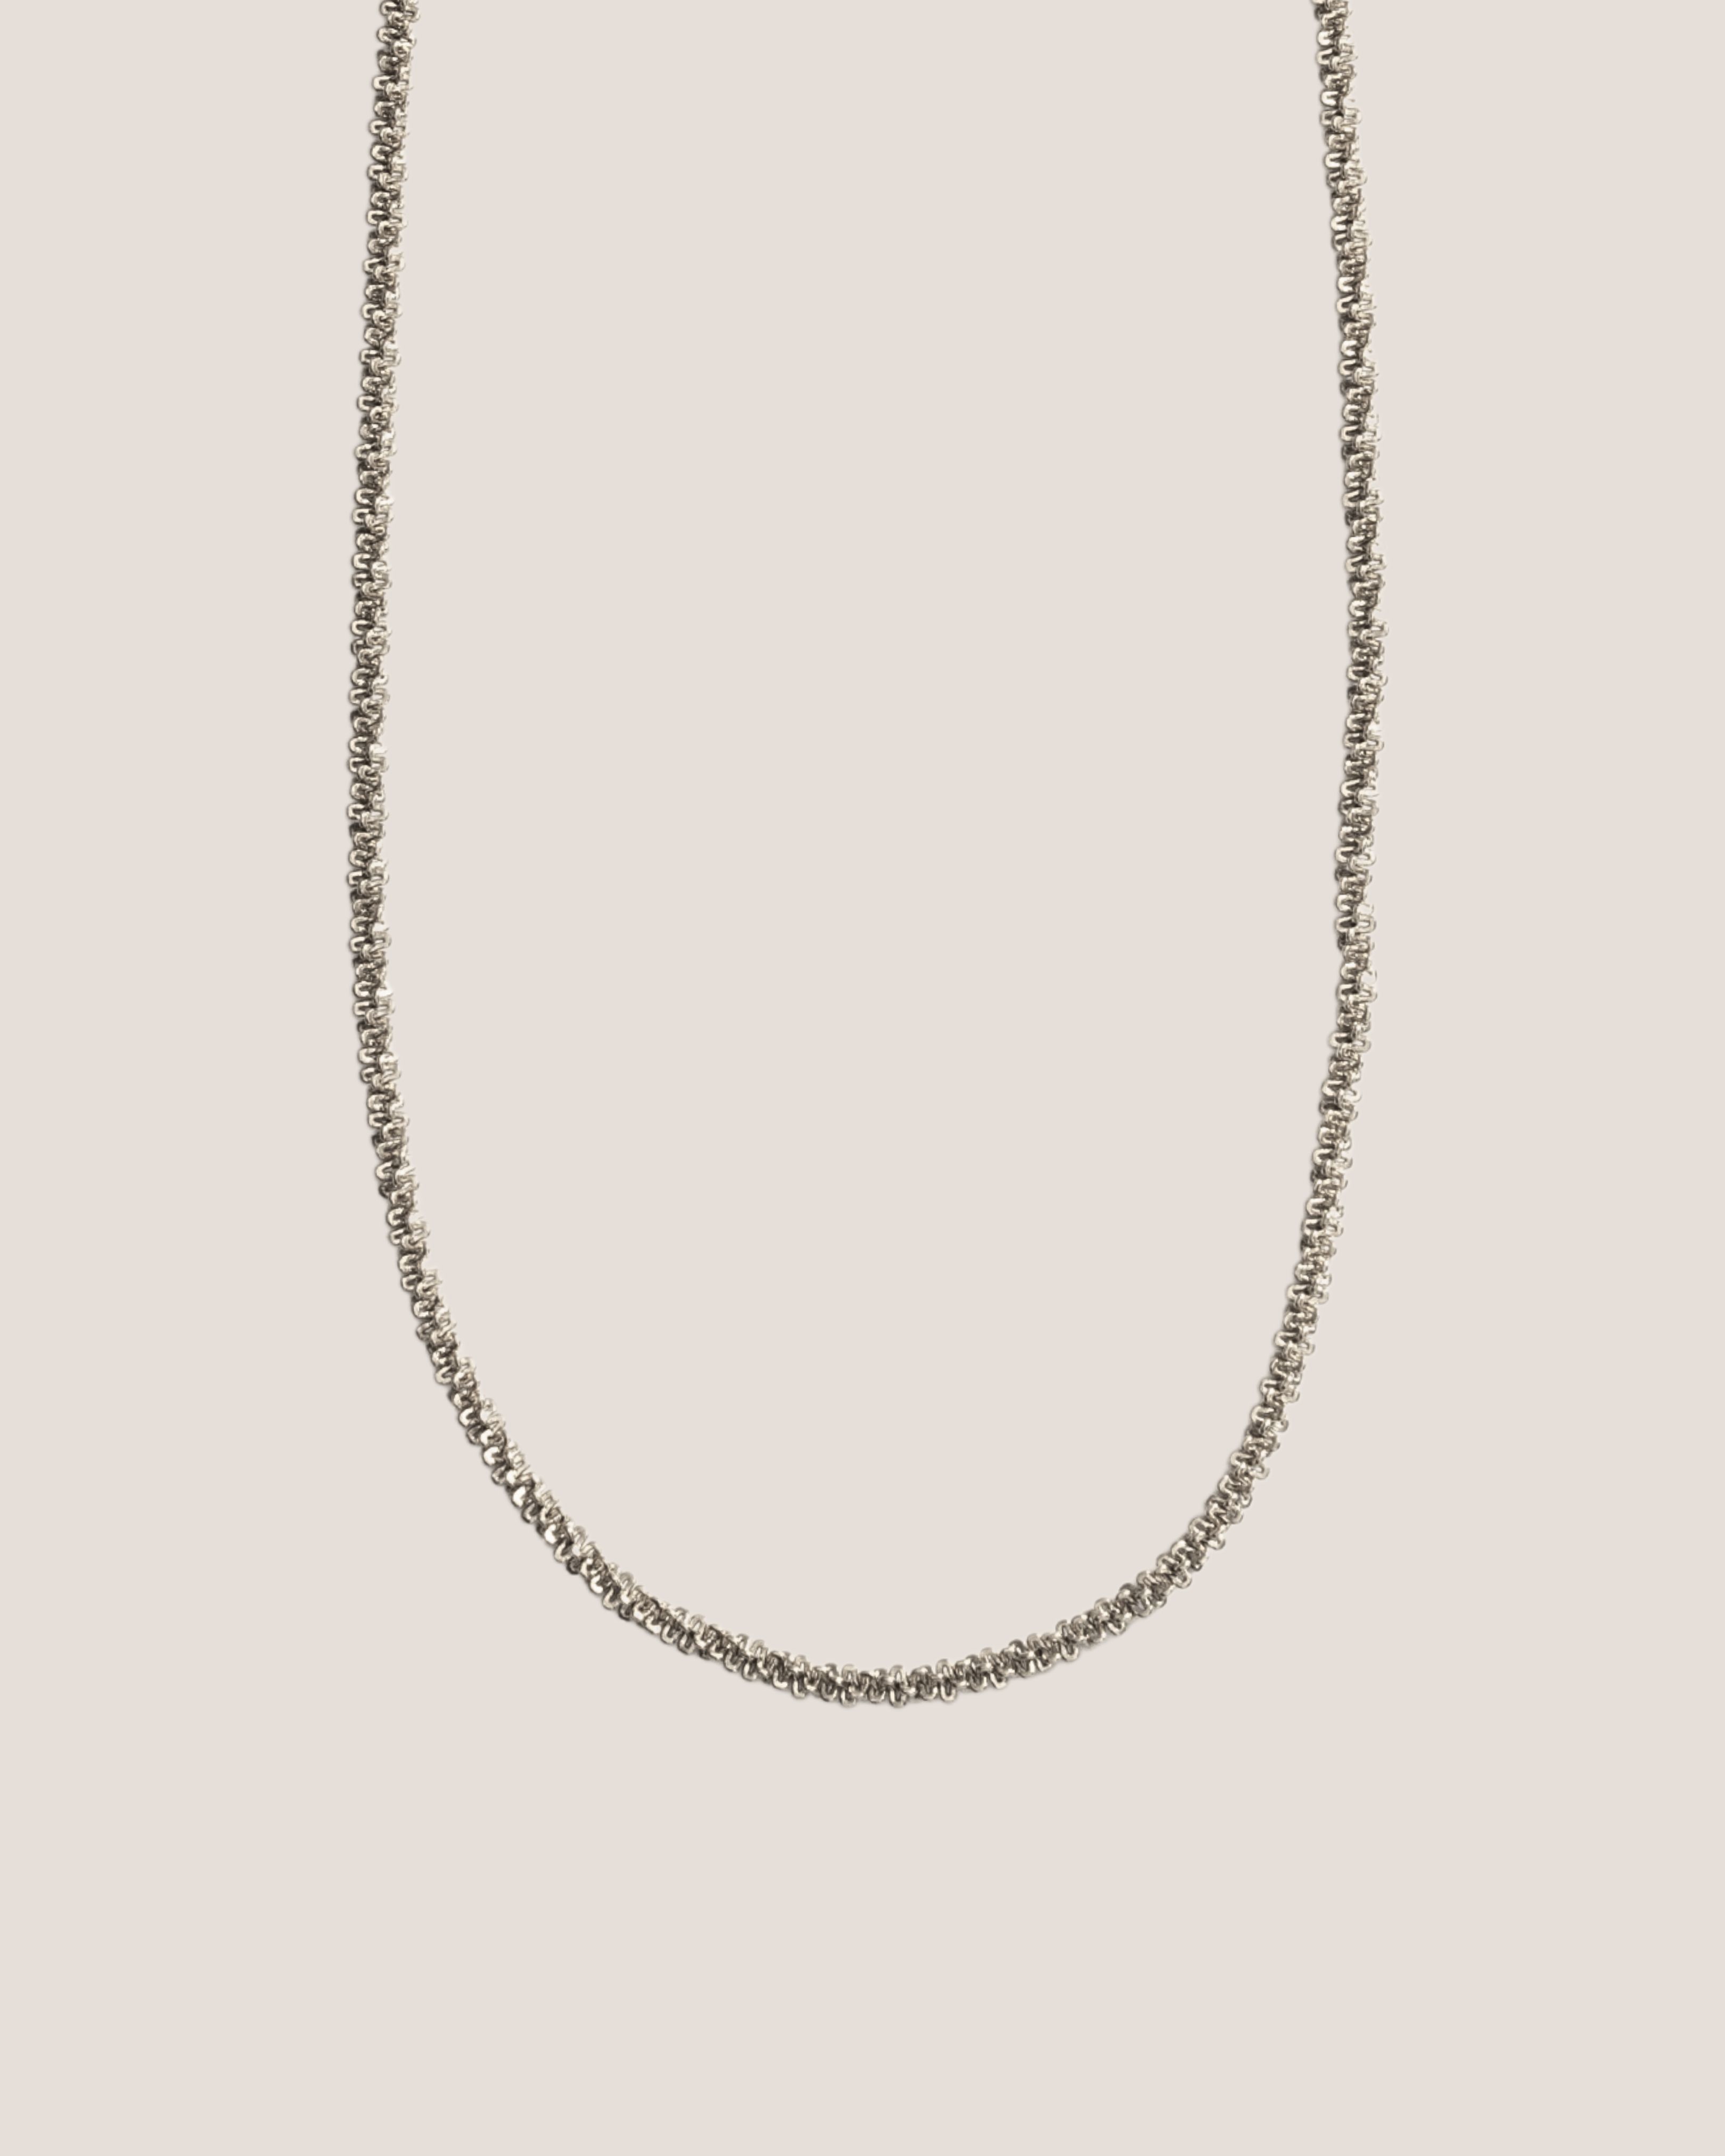 Tweed Silver Chain Necklace